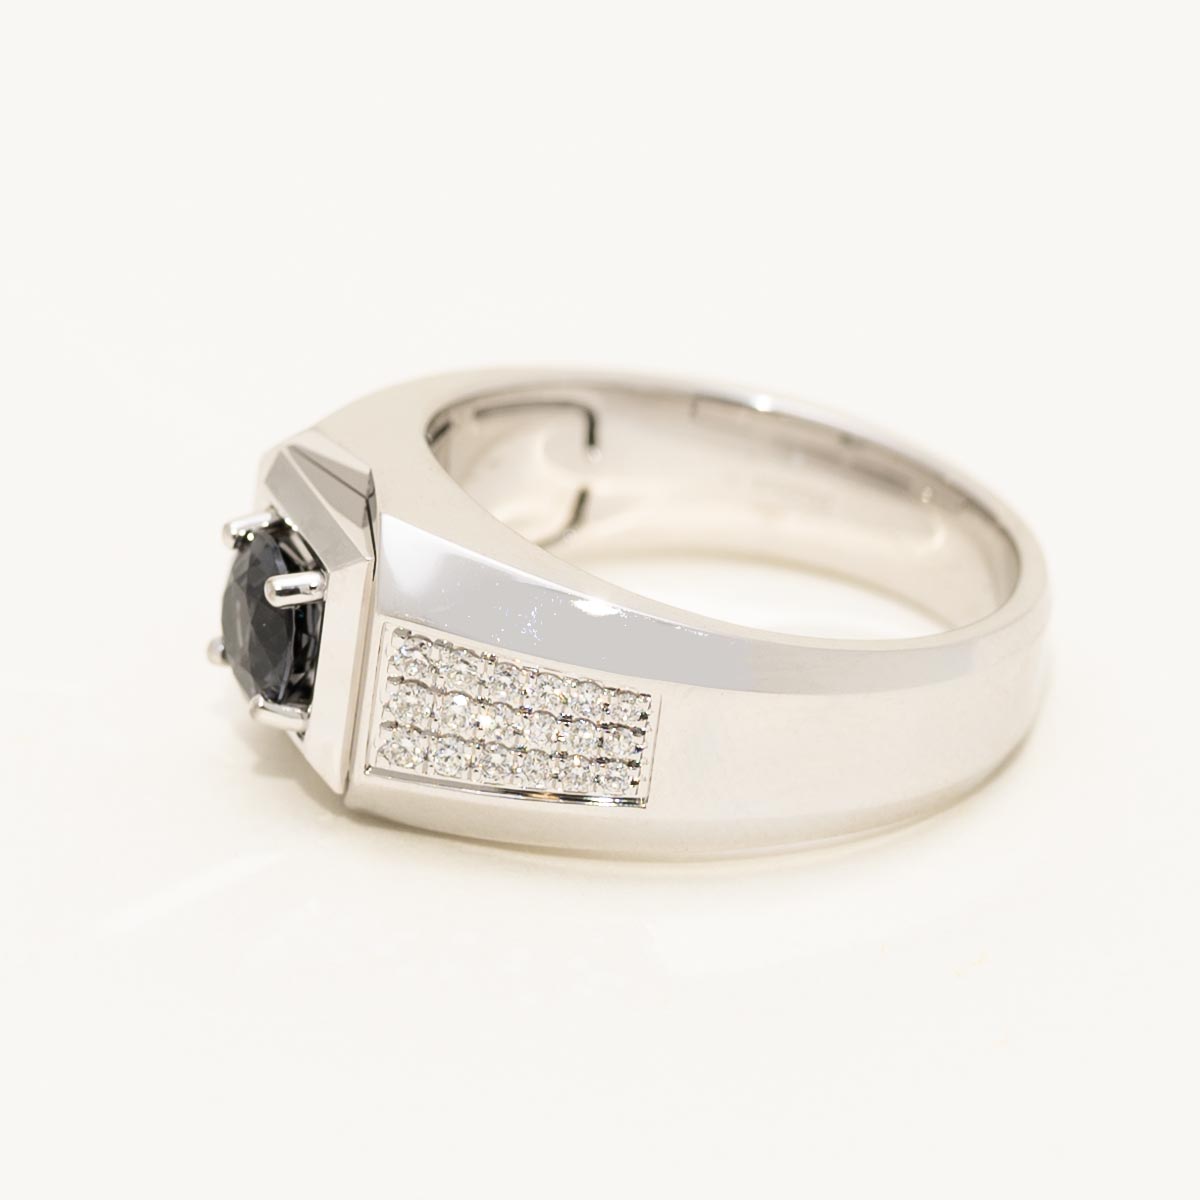 Gray Spinel Mens Ring in 18kt White Gold with Diamonds (1/4t tw)